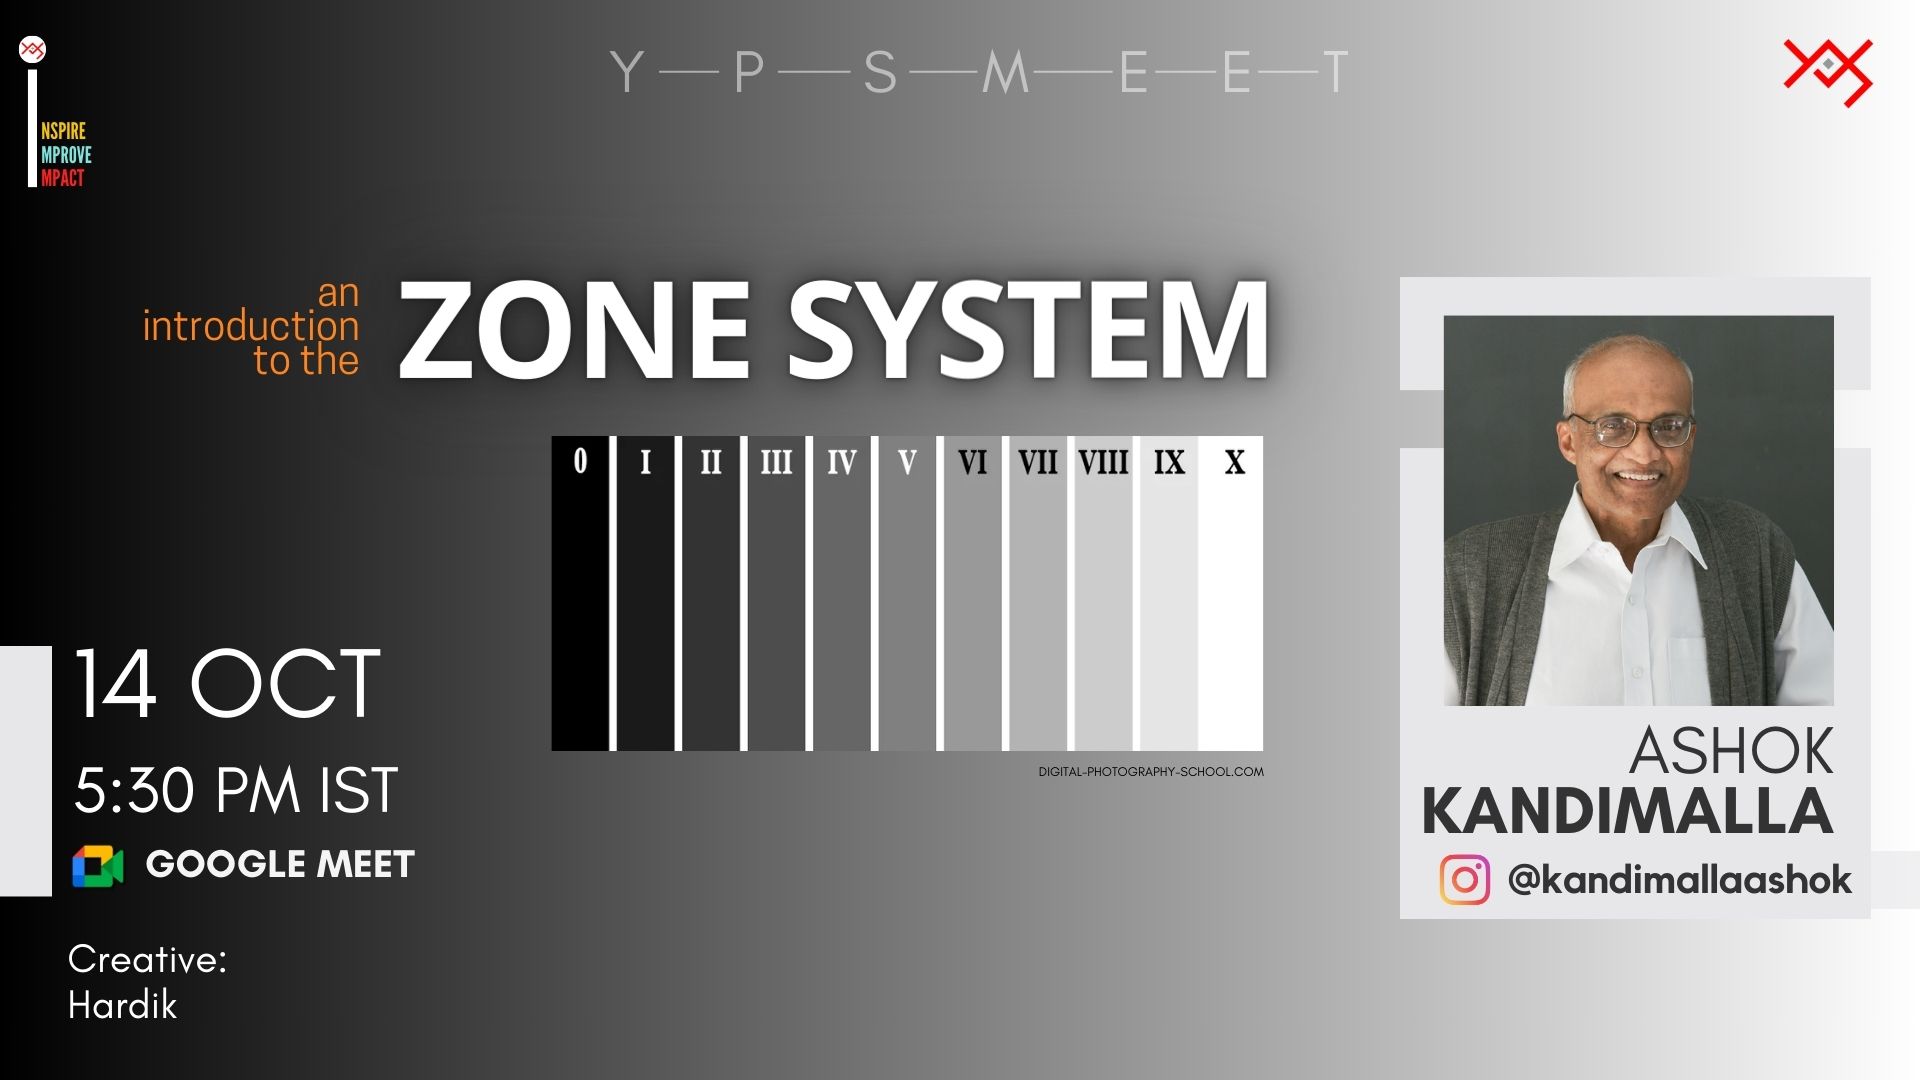 YPS Saturday Meet - An introduction to the Zone System by Mr Ashok Kandimalla on 14 Oct on Google Meet at 5-30 PM IST